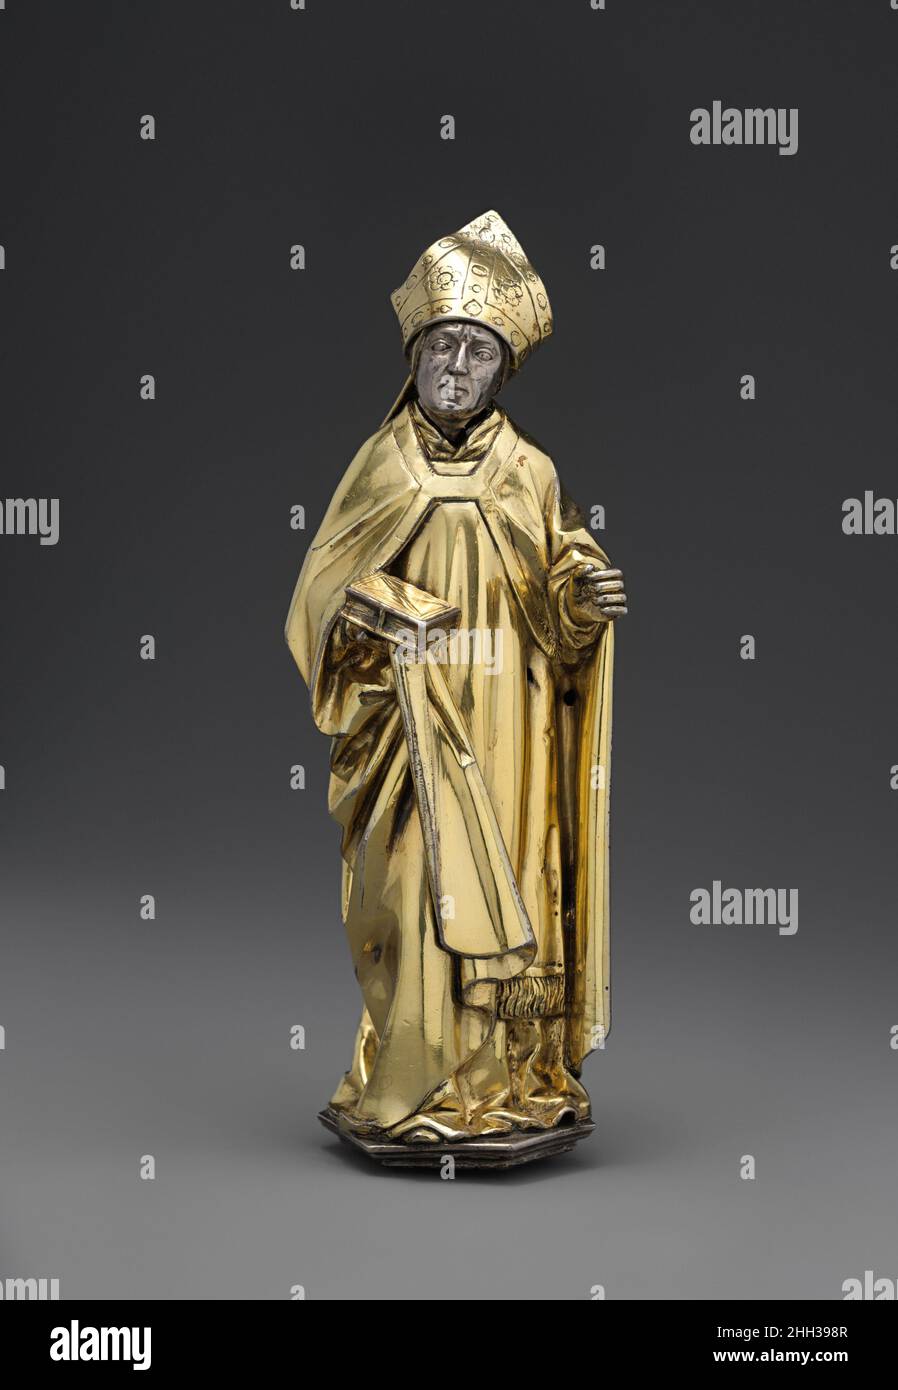 Standing Bishop ca. 1510 Hans von Reutlingen German This finely worked figure appears to have come from the immense bust reliquary of Saint Lambert commissioned by the prince-bishop Erard de La Marck for the now-destroyed cathedral of Saint Lambert in Liège. Created by the Aachen goldsmith Hans von Reutlingen and his workshop beginning in 1508, it was consecrated on April 22, 1512. The bishop, who originally held a crozier in his left hand, probably represents a locally venerated bishop saint.. Standing Bishop. Hans von Reutlingen (German, Aachen, 1465–1547) or Workshop. German. ca. 1510. Silv Stock Photo